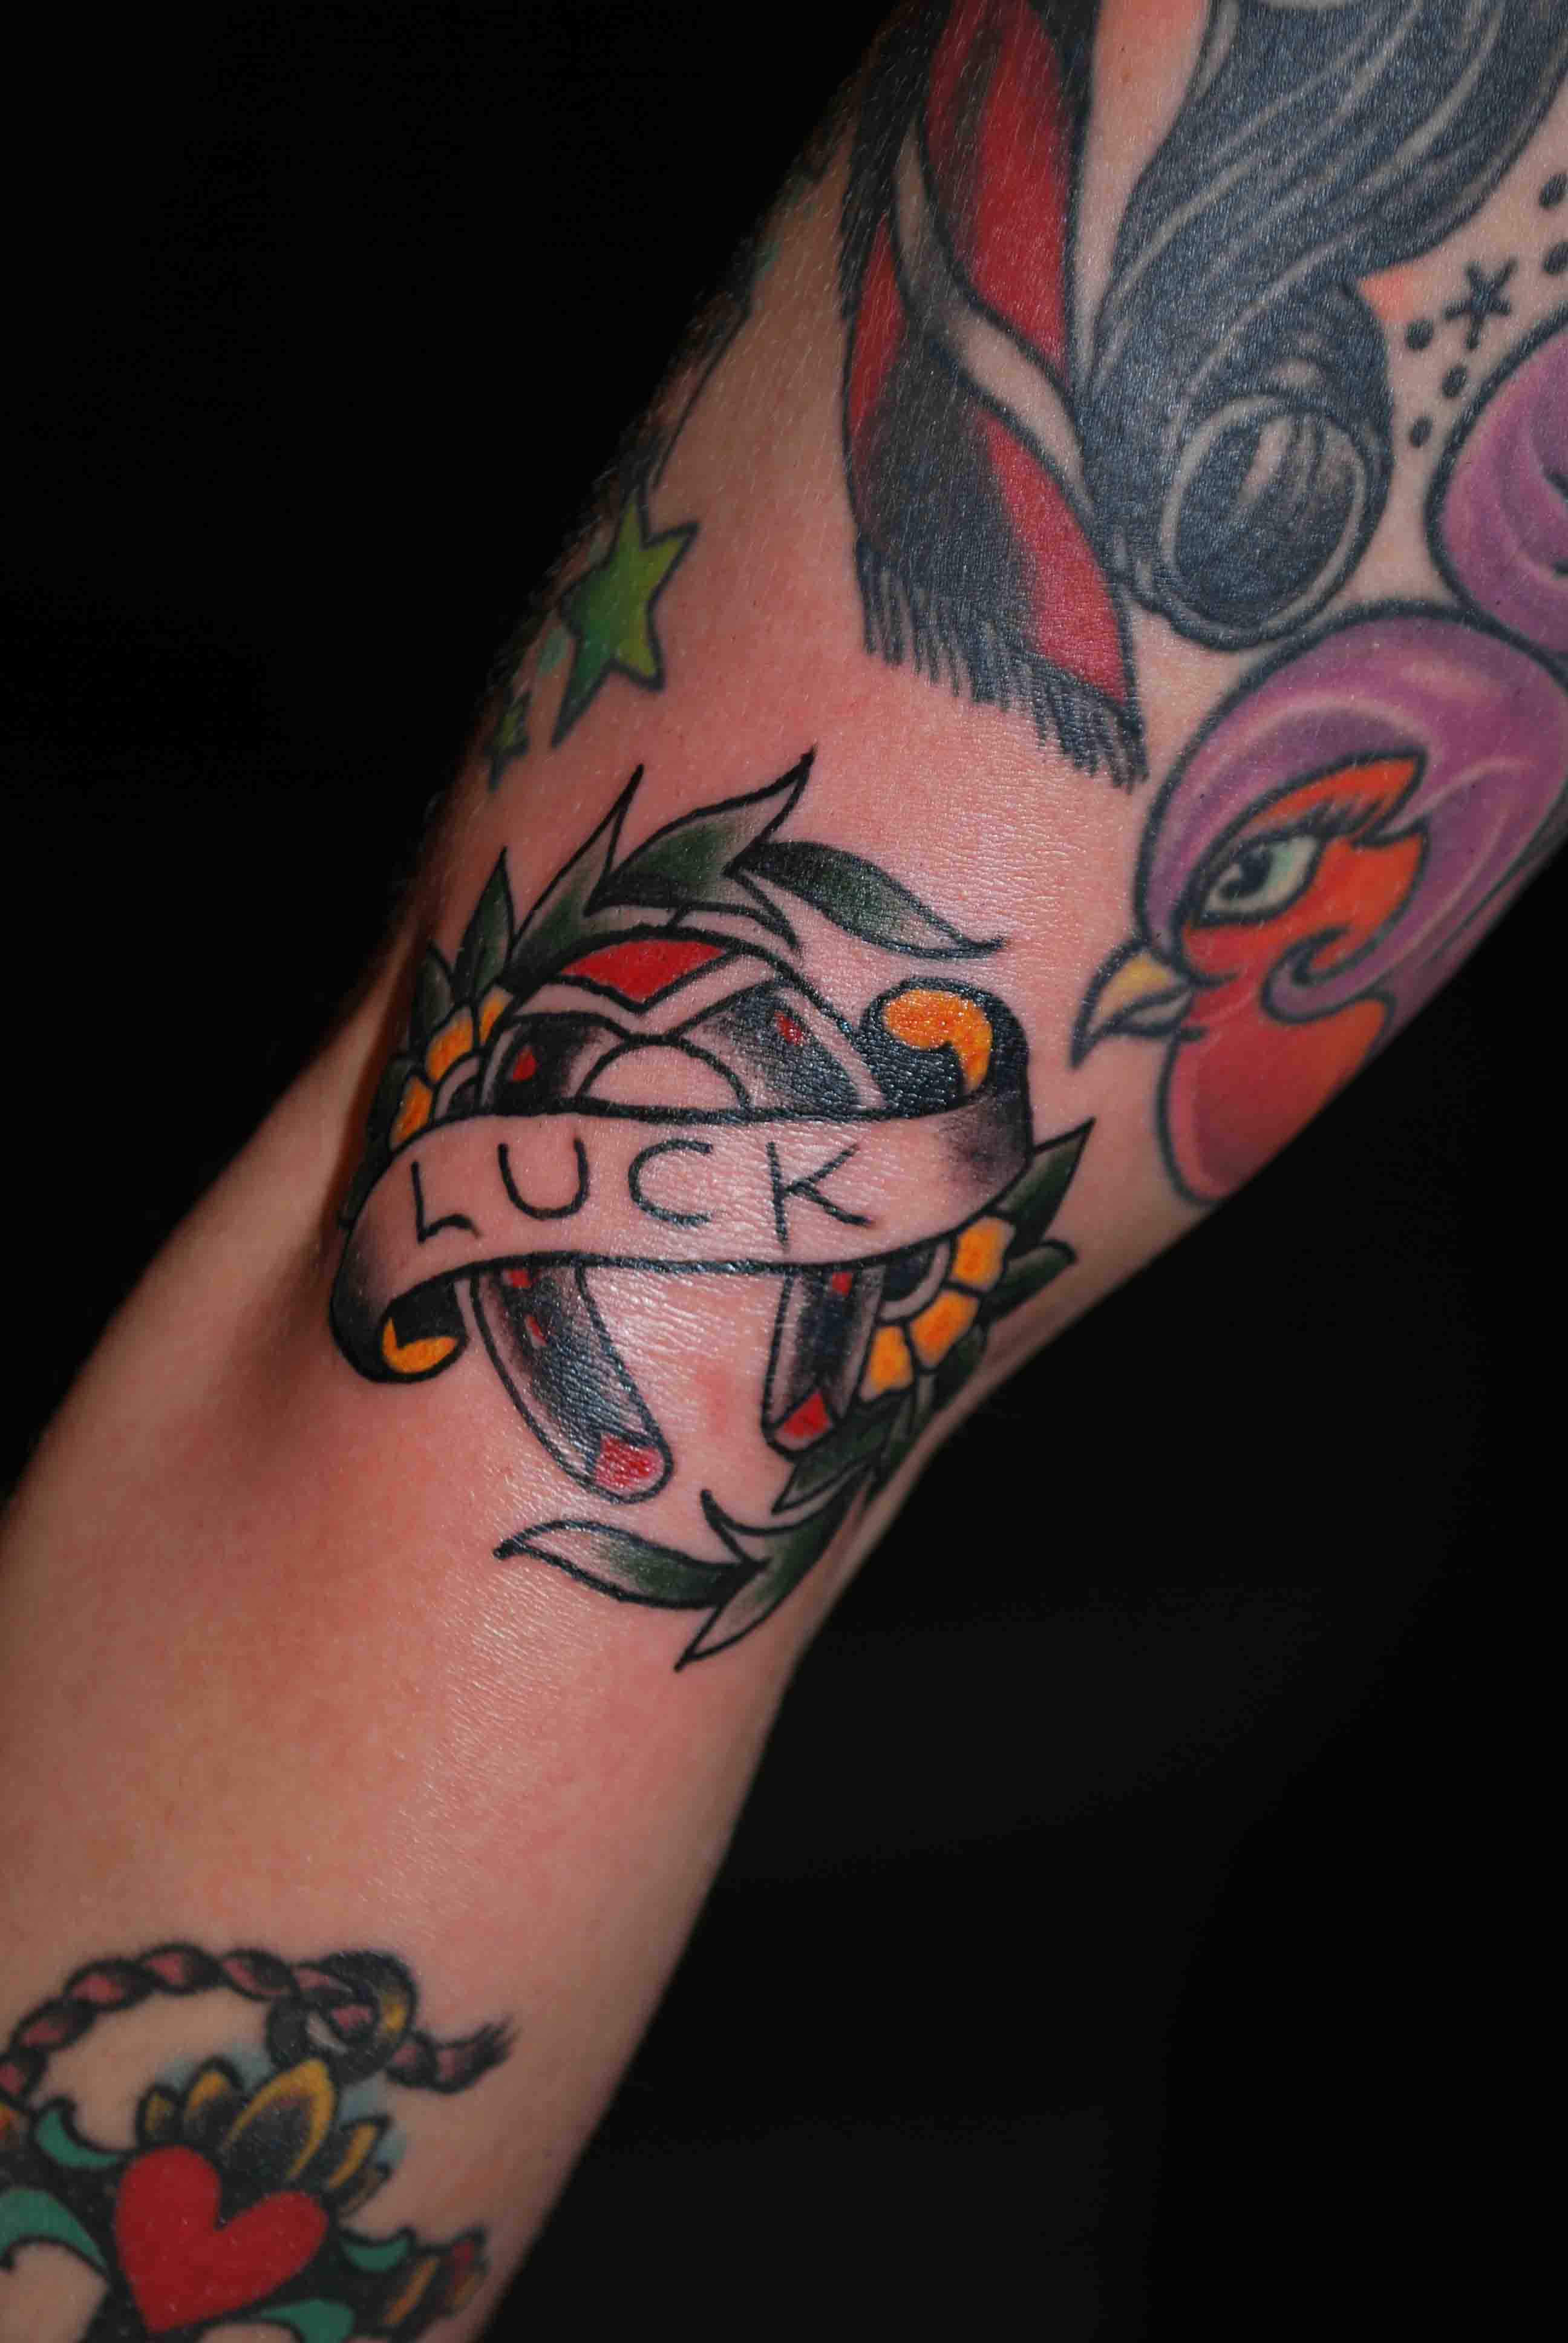 Traditional Horseshoe With Luck Banner Tattoo Design For Elbow